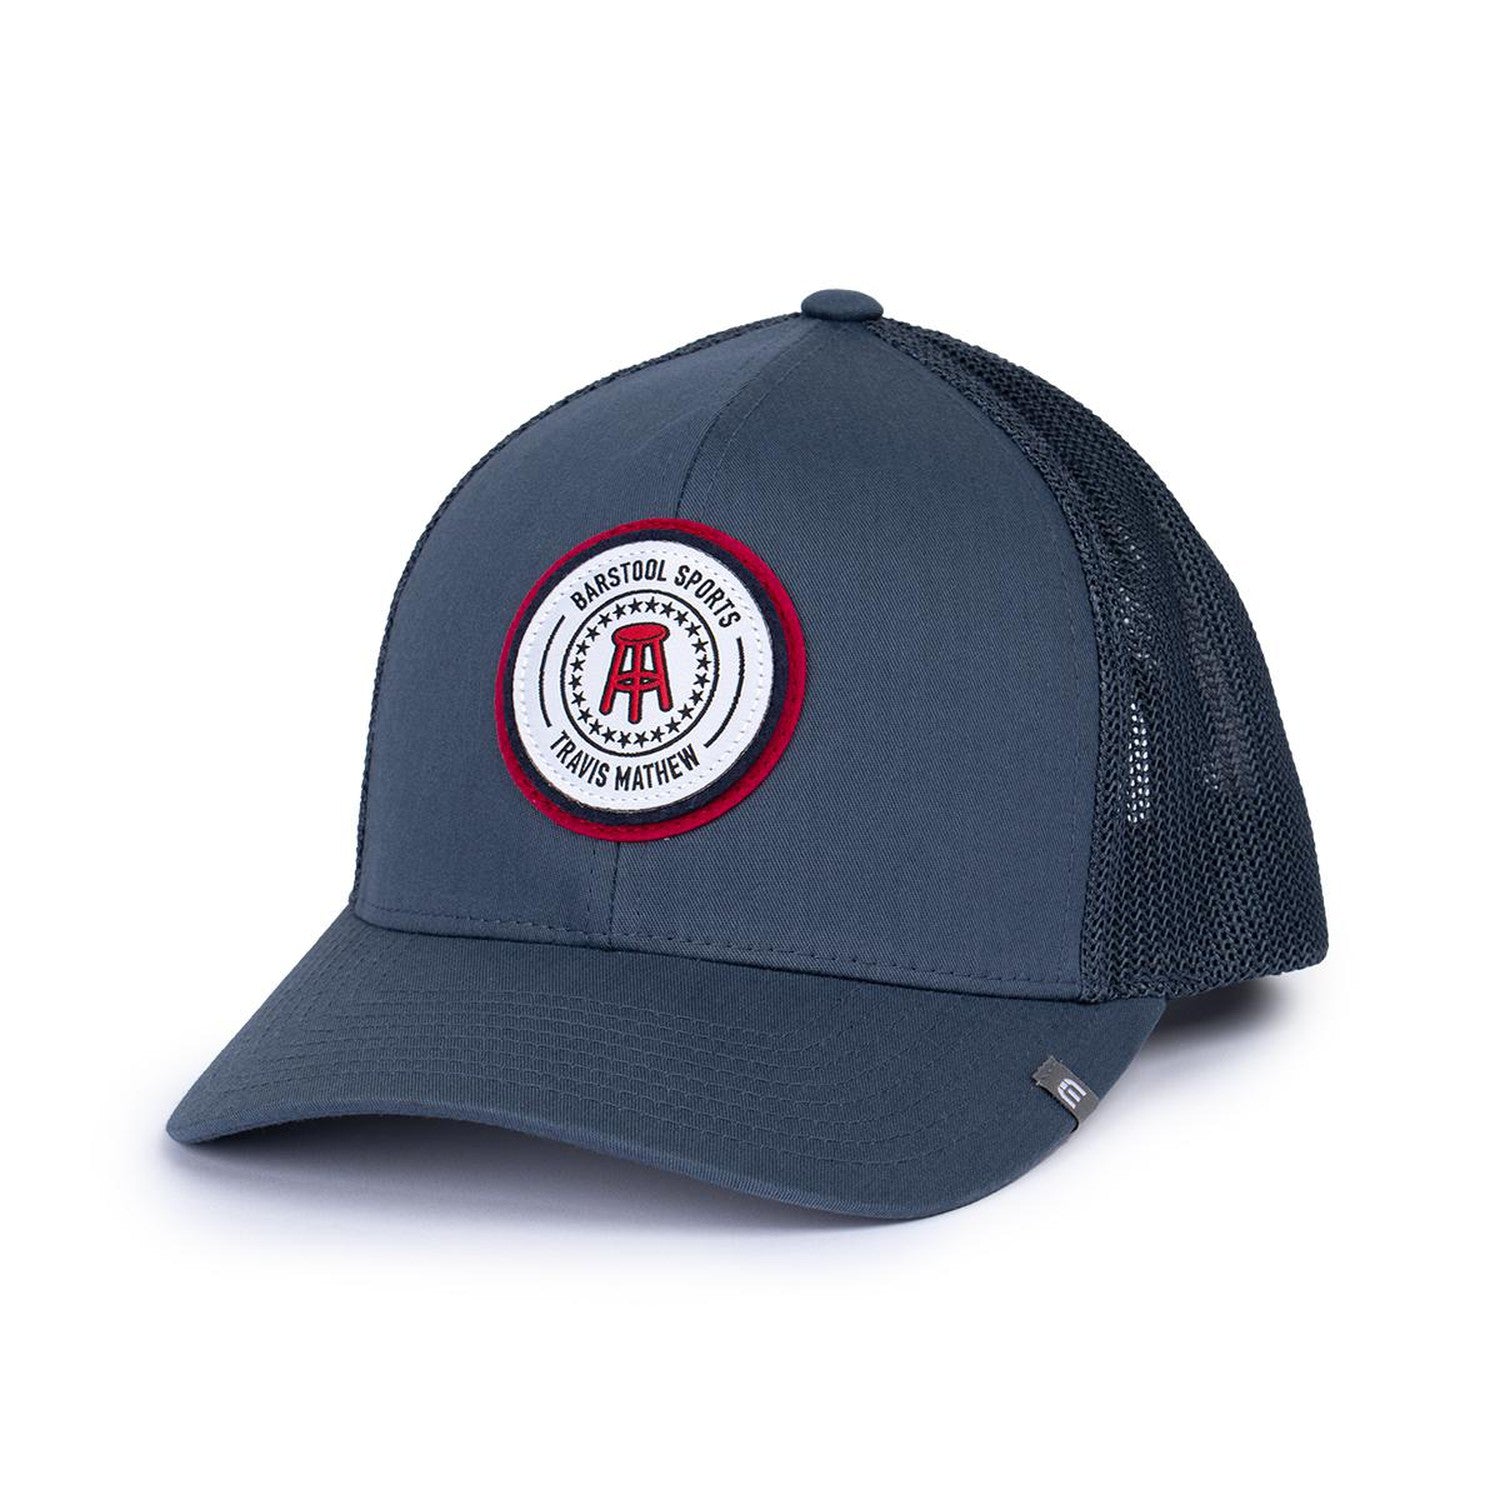 TravisMathew x Barstool Patch Hat-Hats-Fore Play-Blue-One Size-Barstool Sports